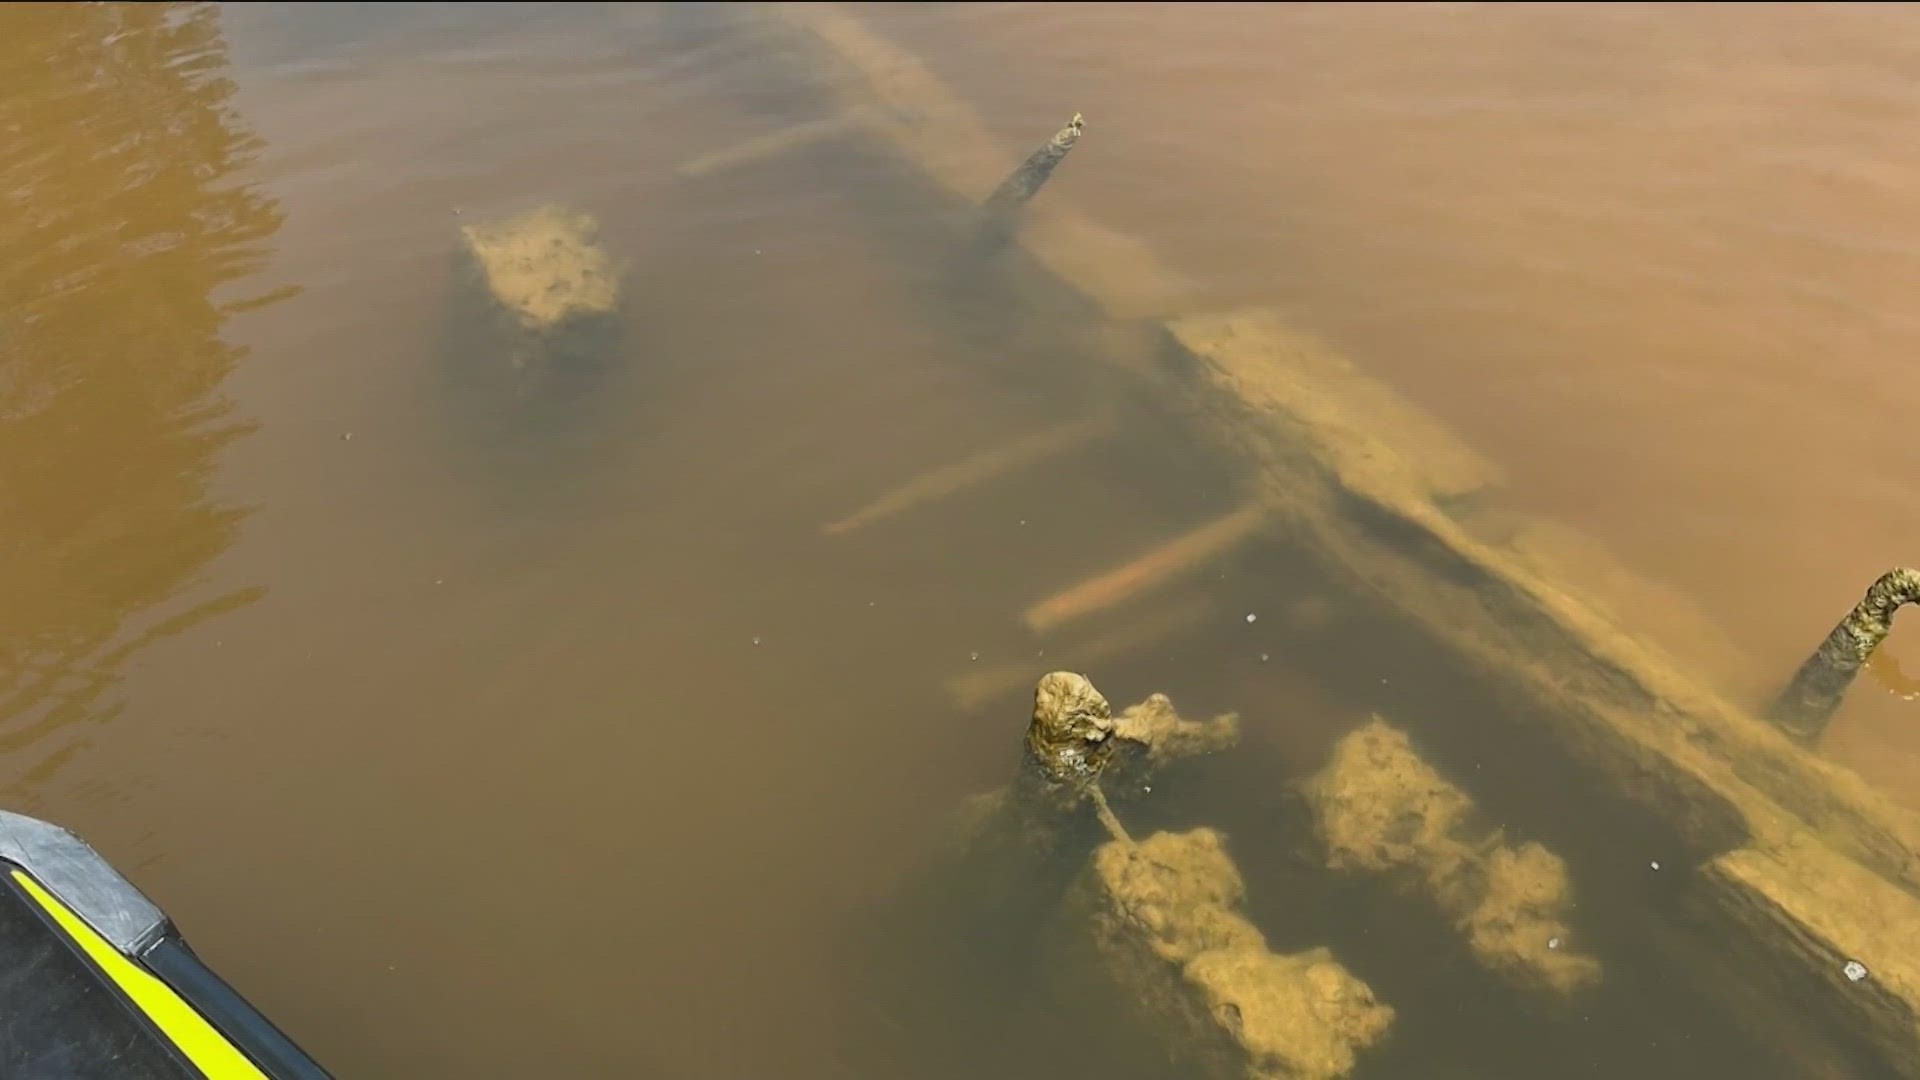 An archaeologist will soon visit the Neches River to investigate after a man discovered remnants of an old ship buried just inches beneath the water's surface.